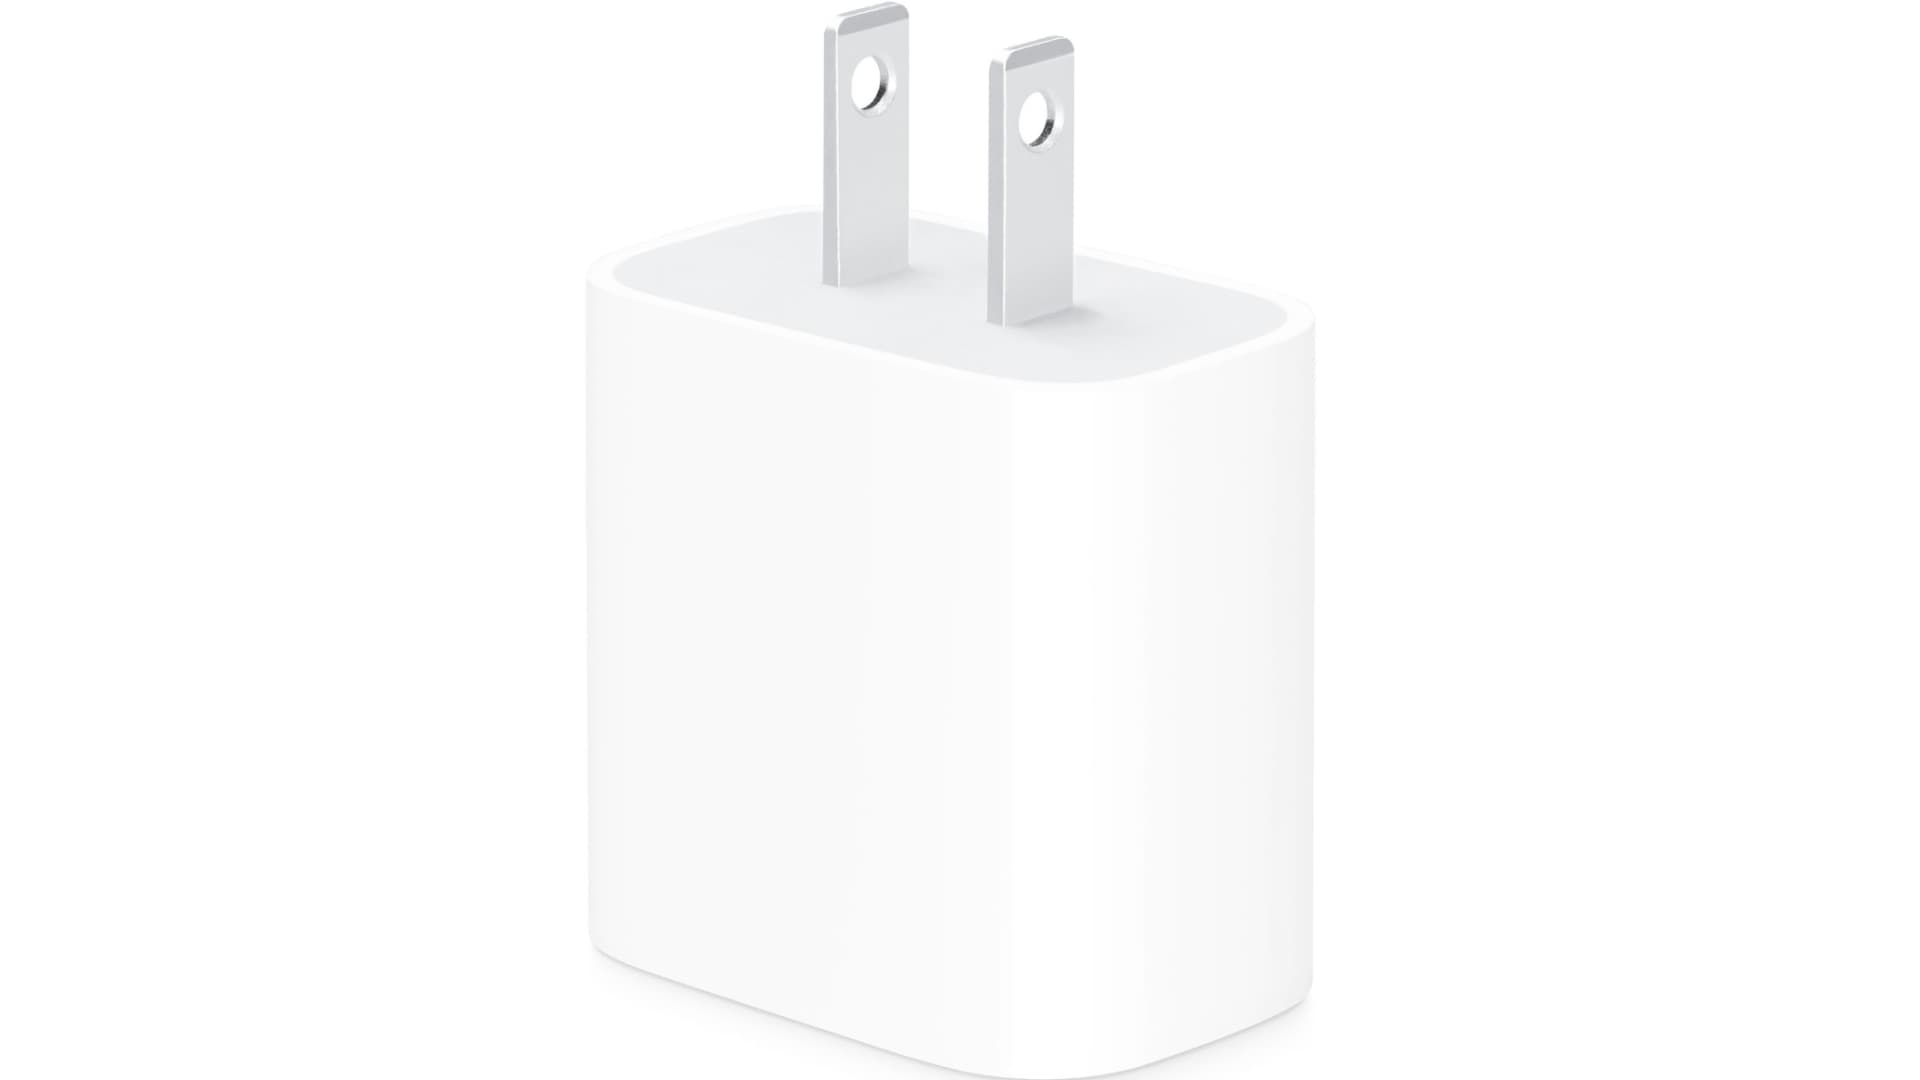 Apple's 18W fast charger for iPhone 11.